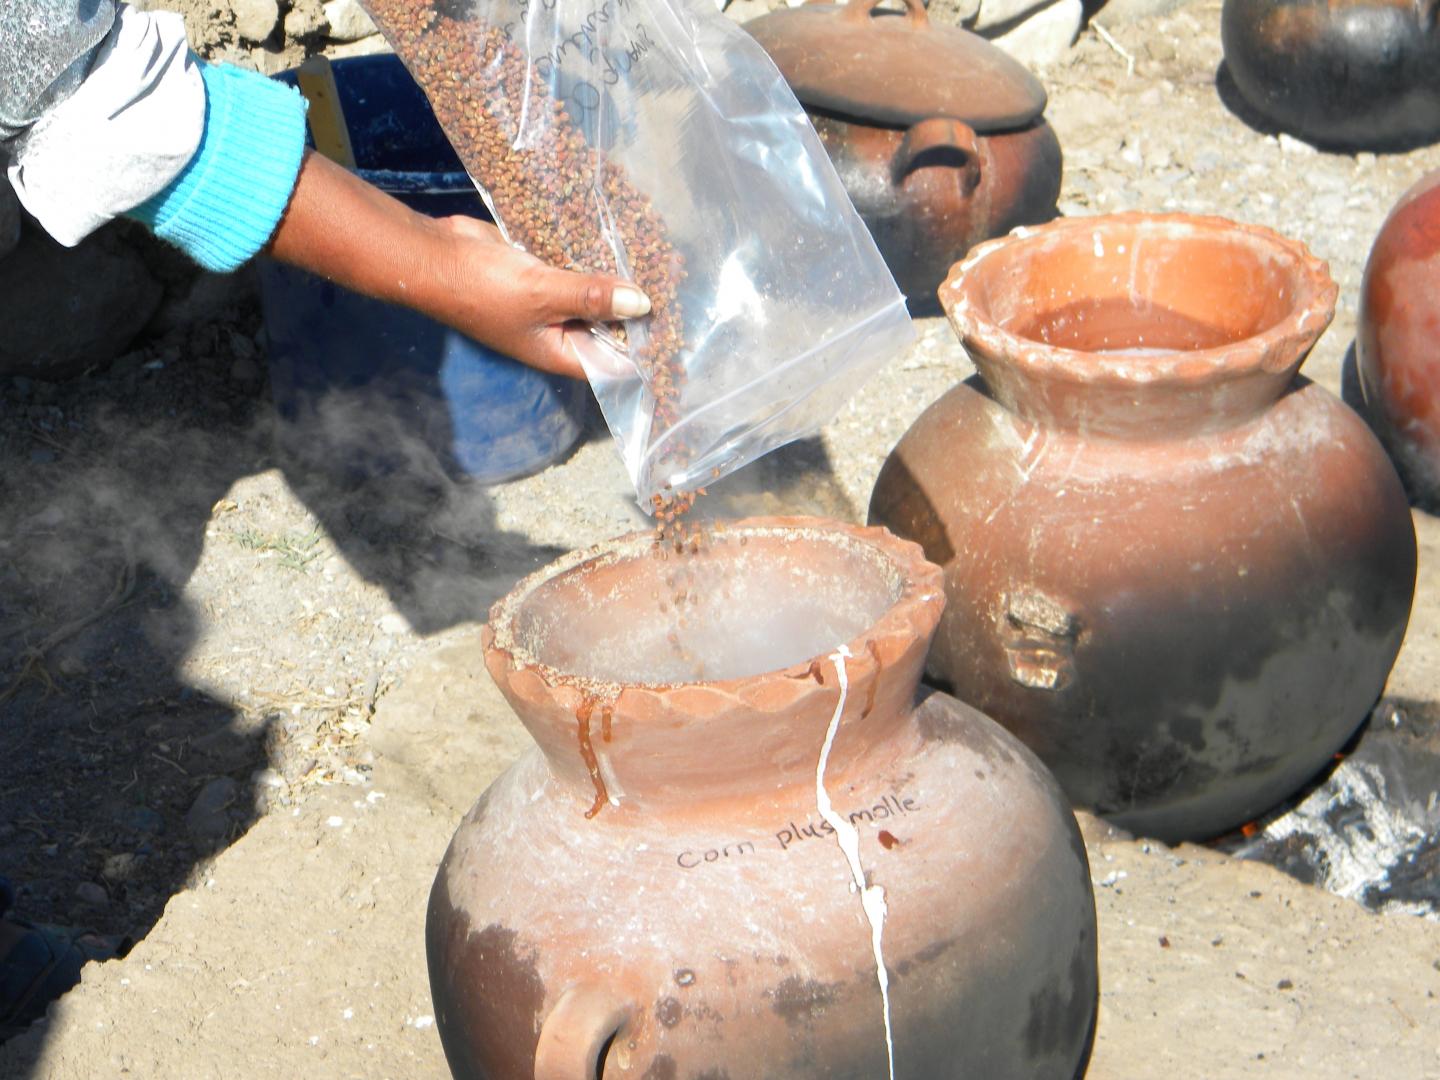 Archaeologists unearth more evidence that when a civilization drinks together, it stays together